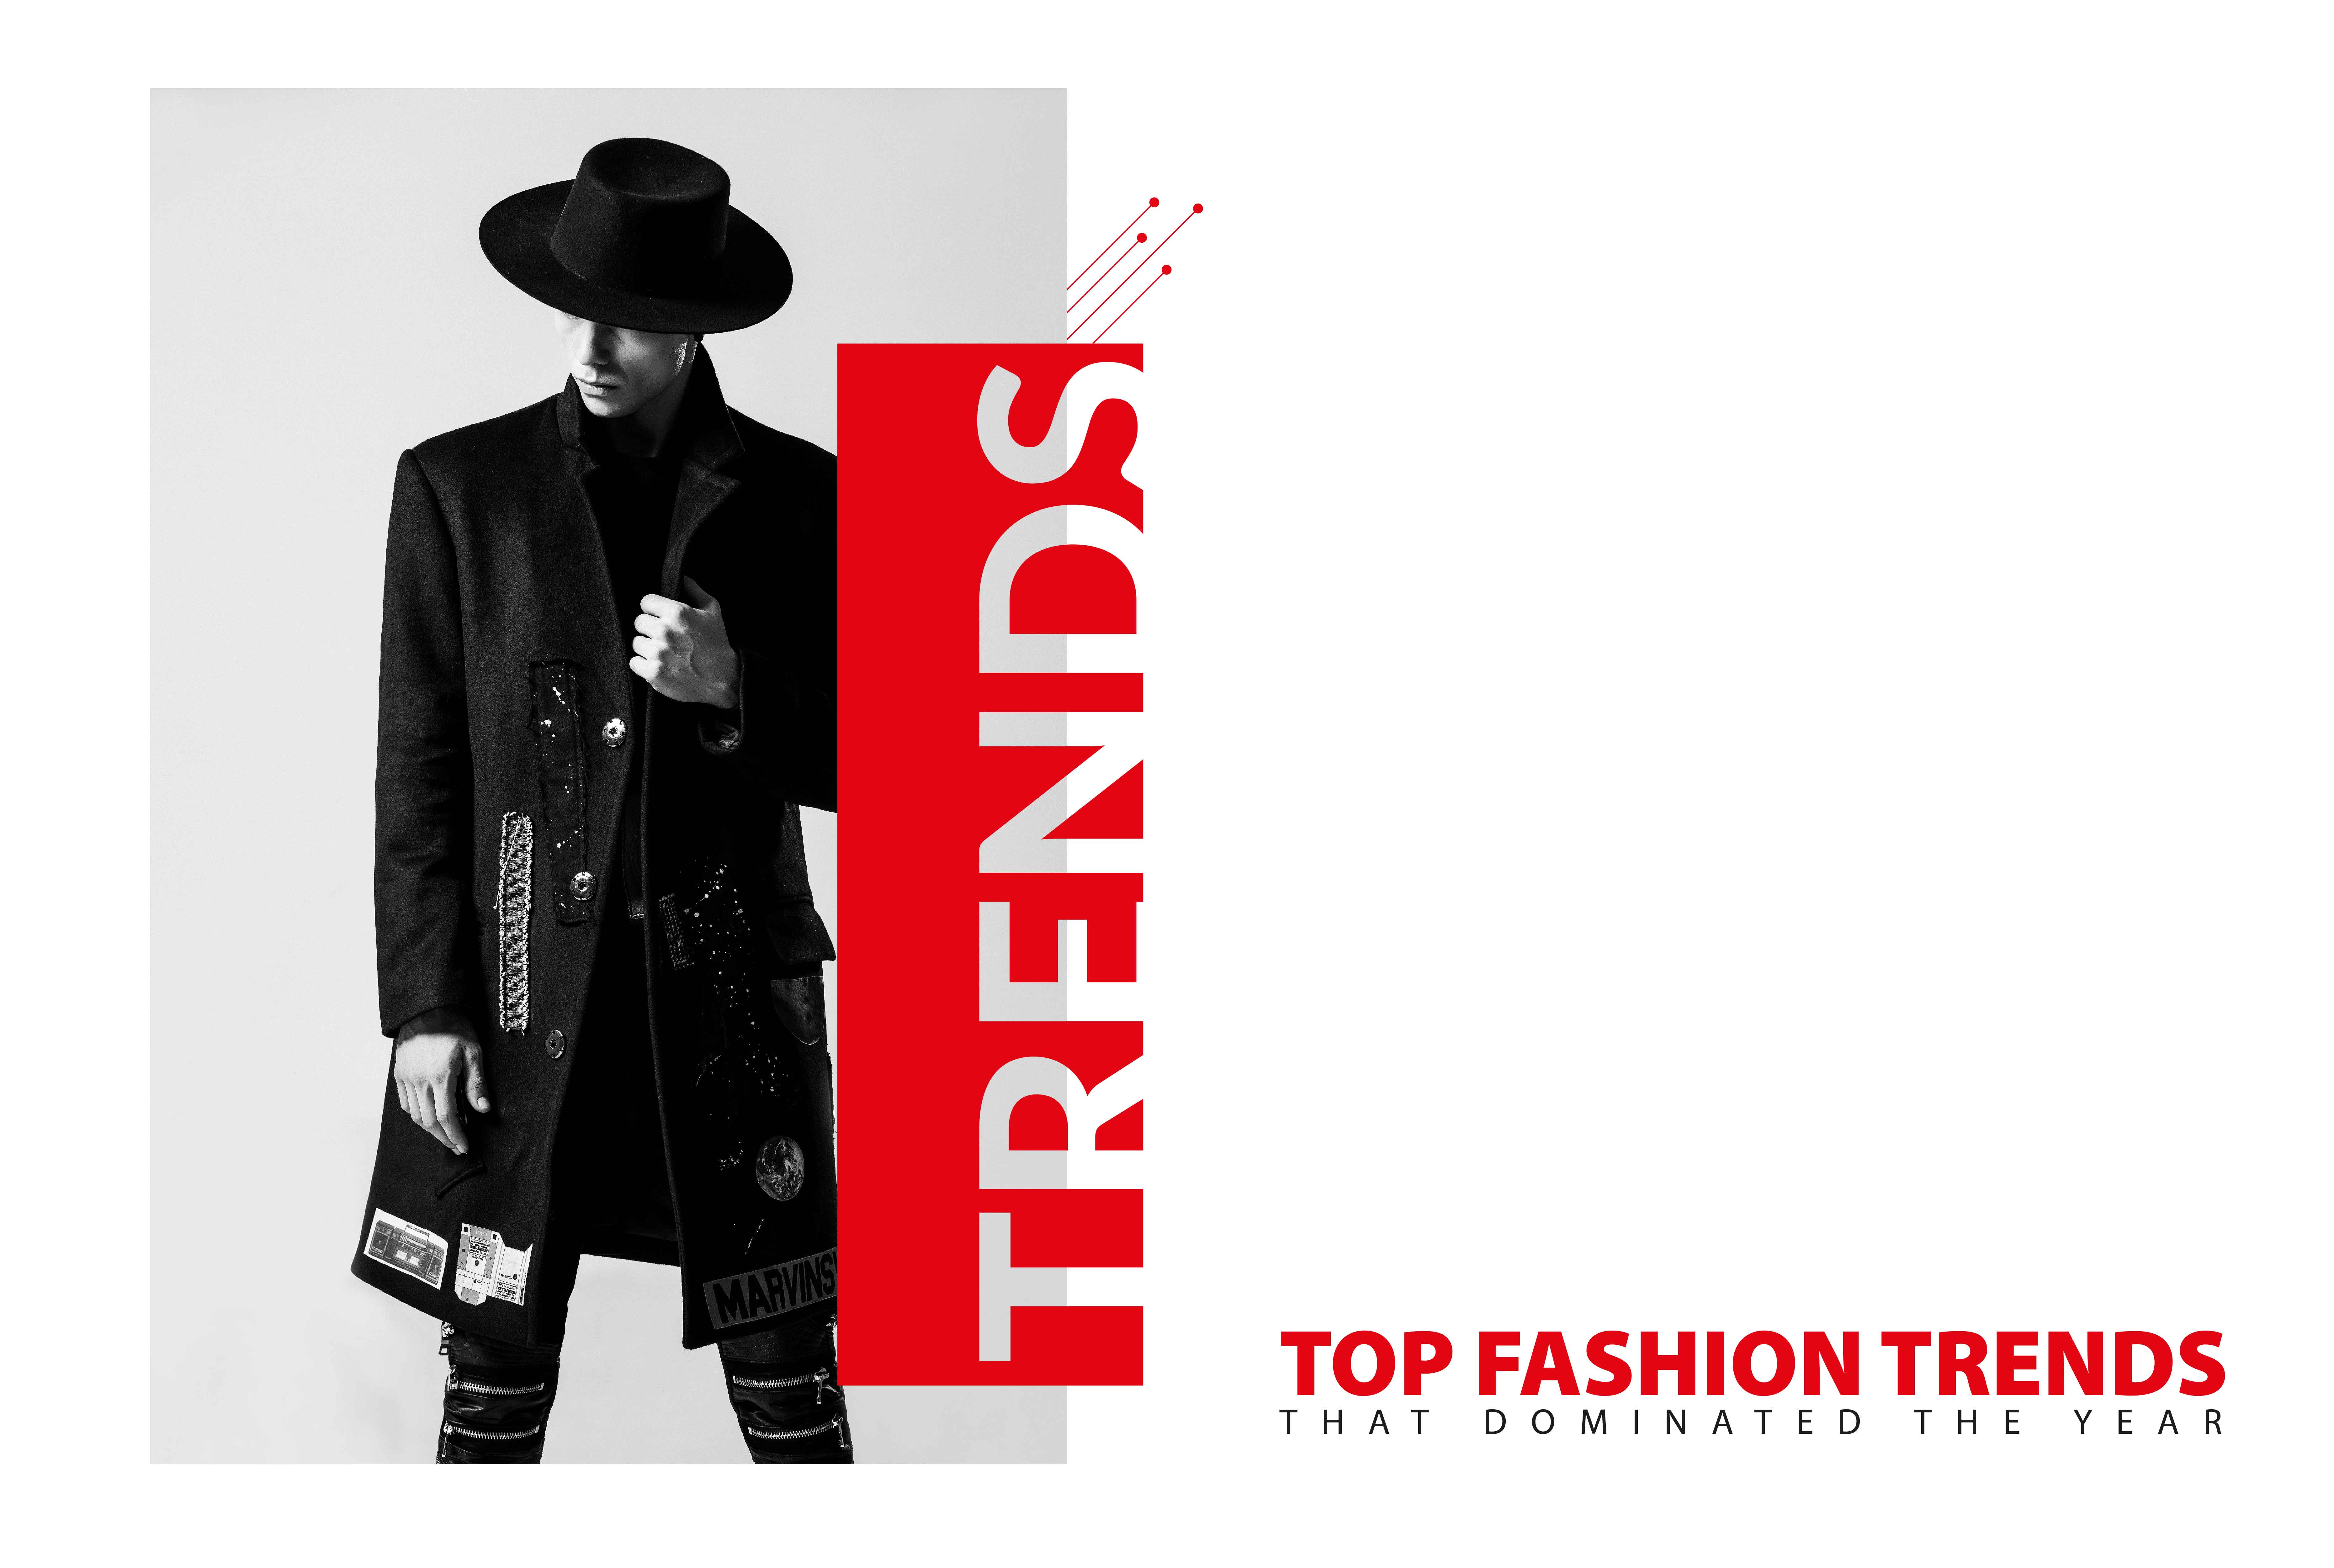 Top Fashion Trends That Dominated the Year